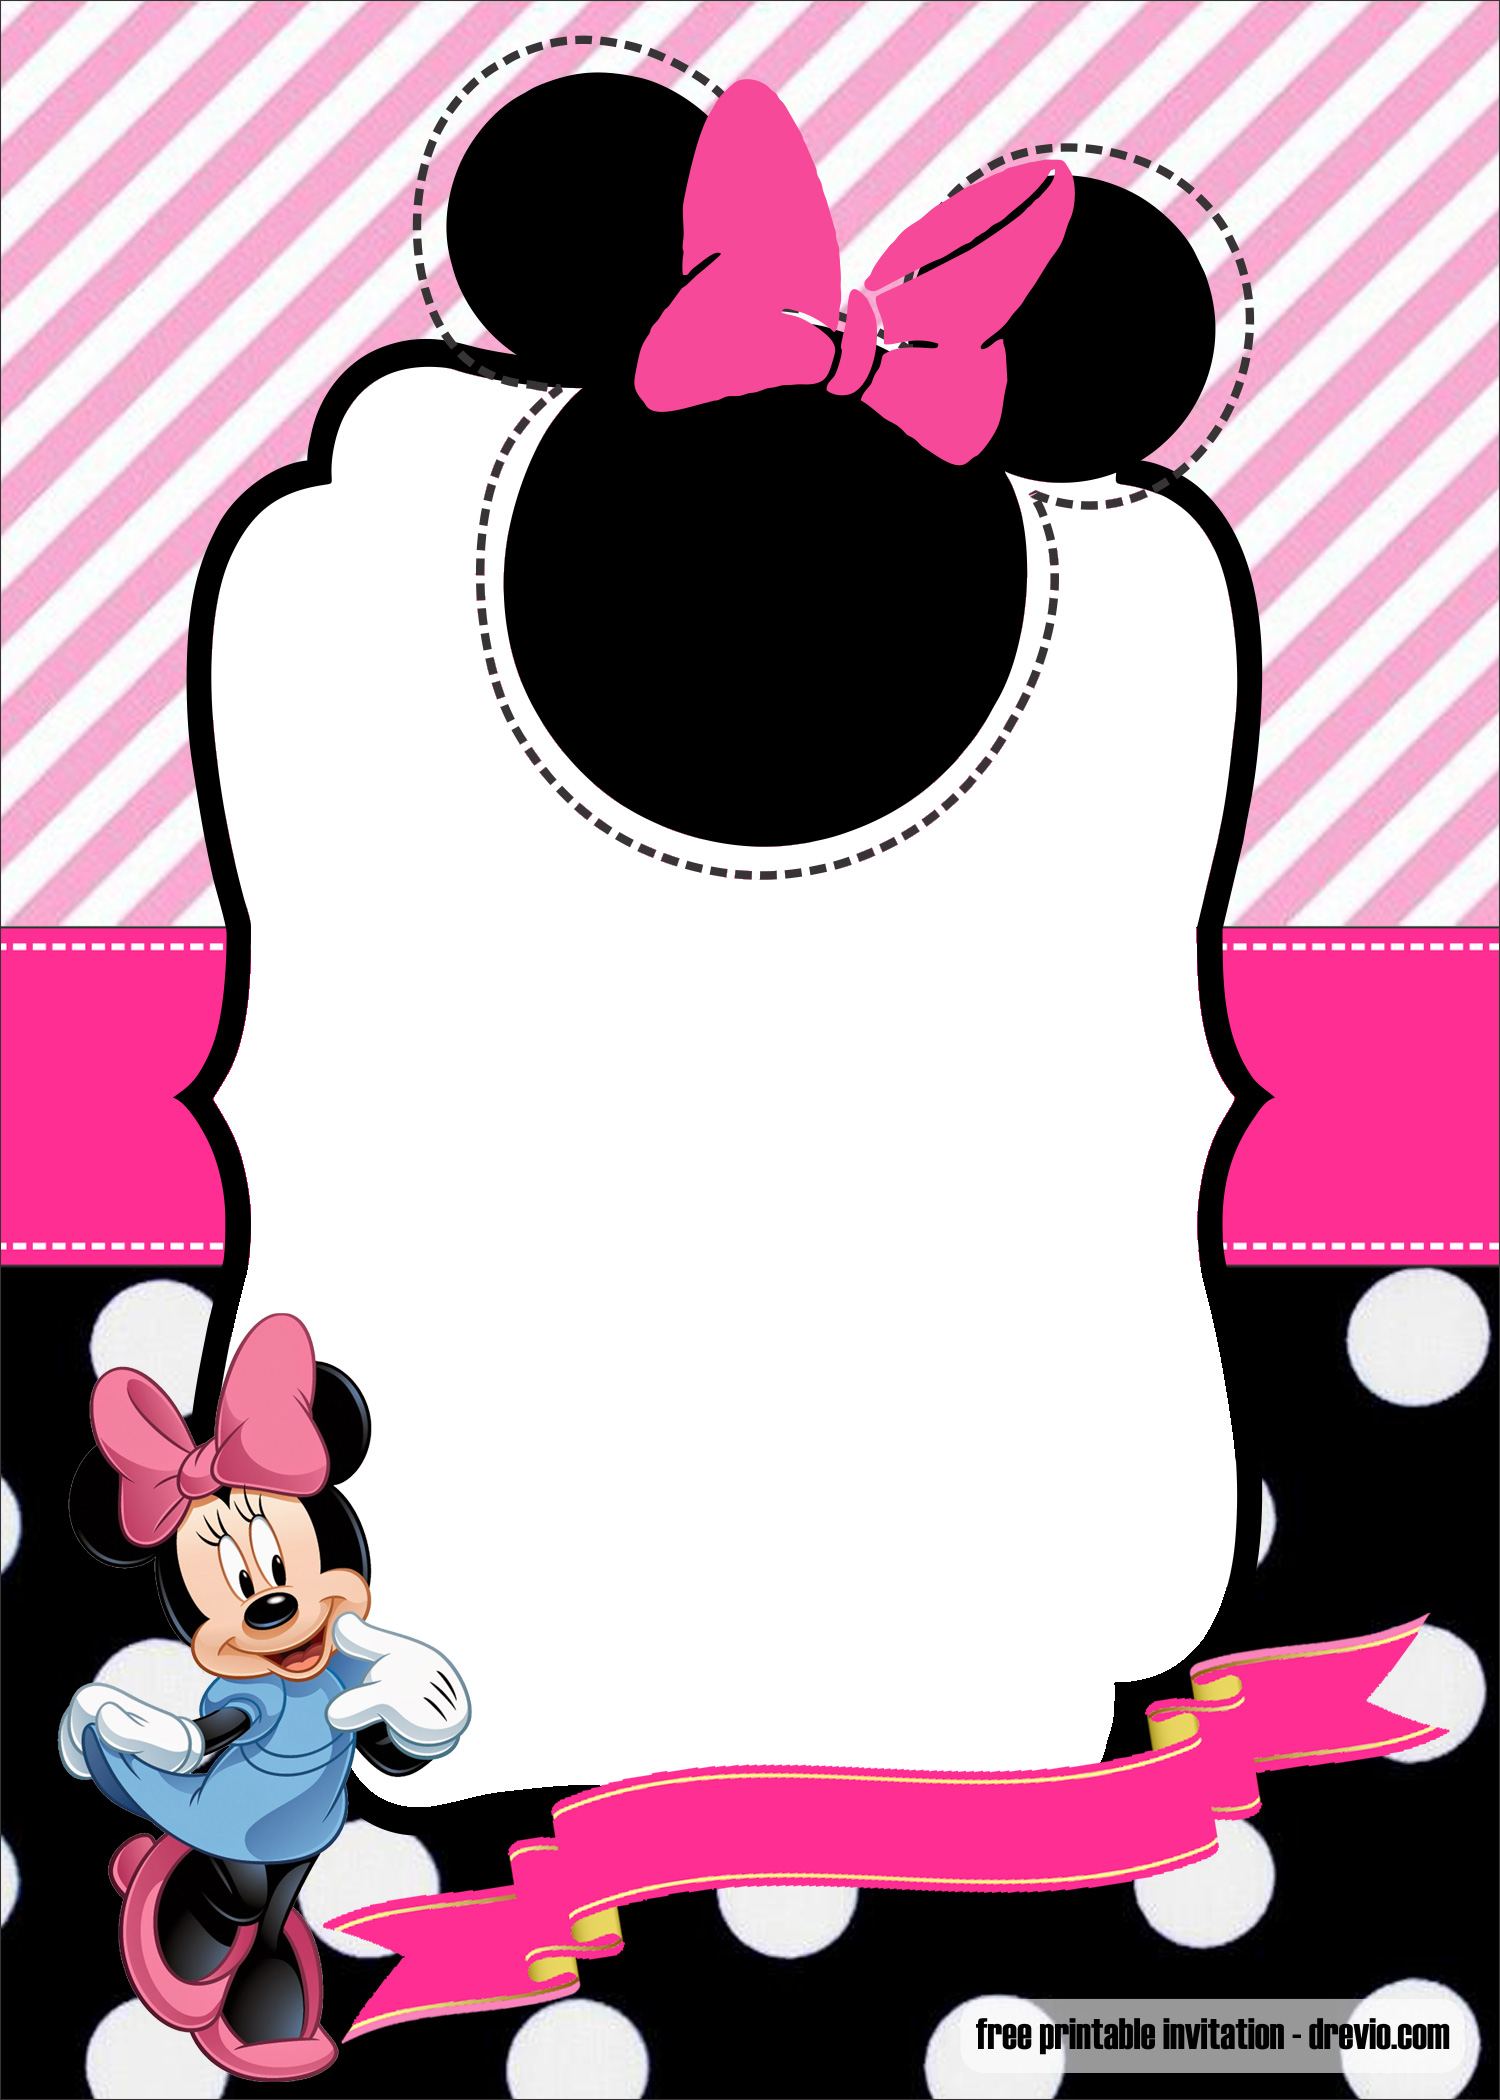 FREE Minnie Mouse 1st birthday invitation template Download Hundreds